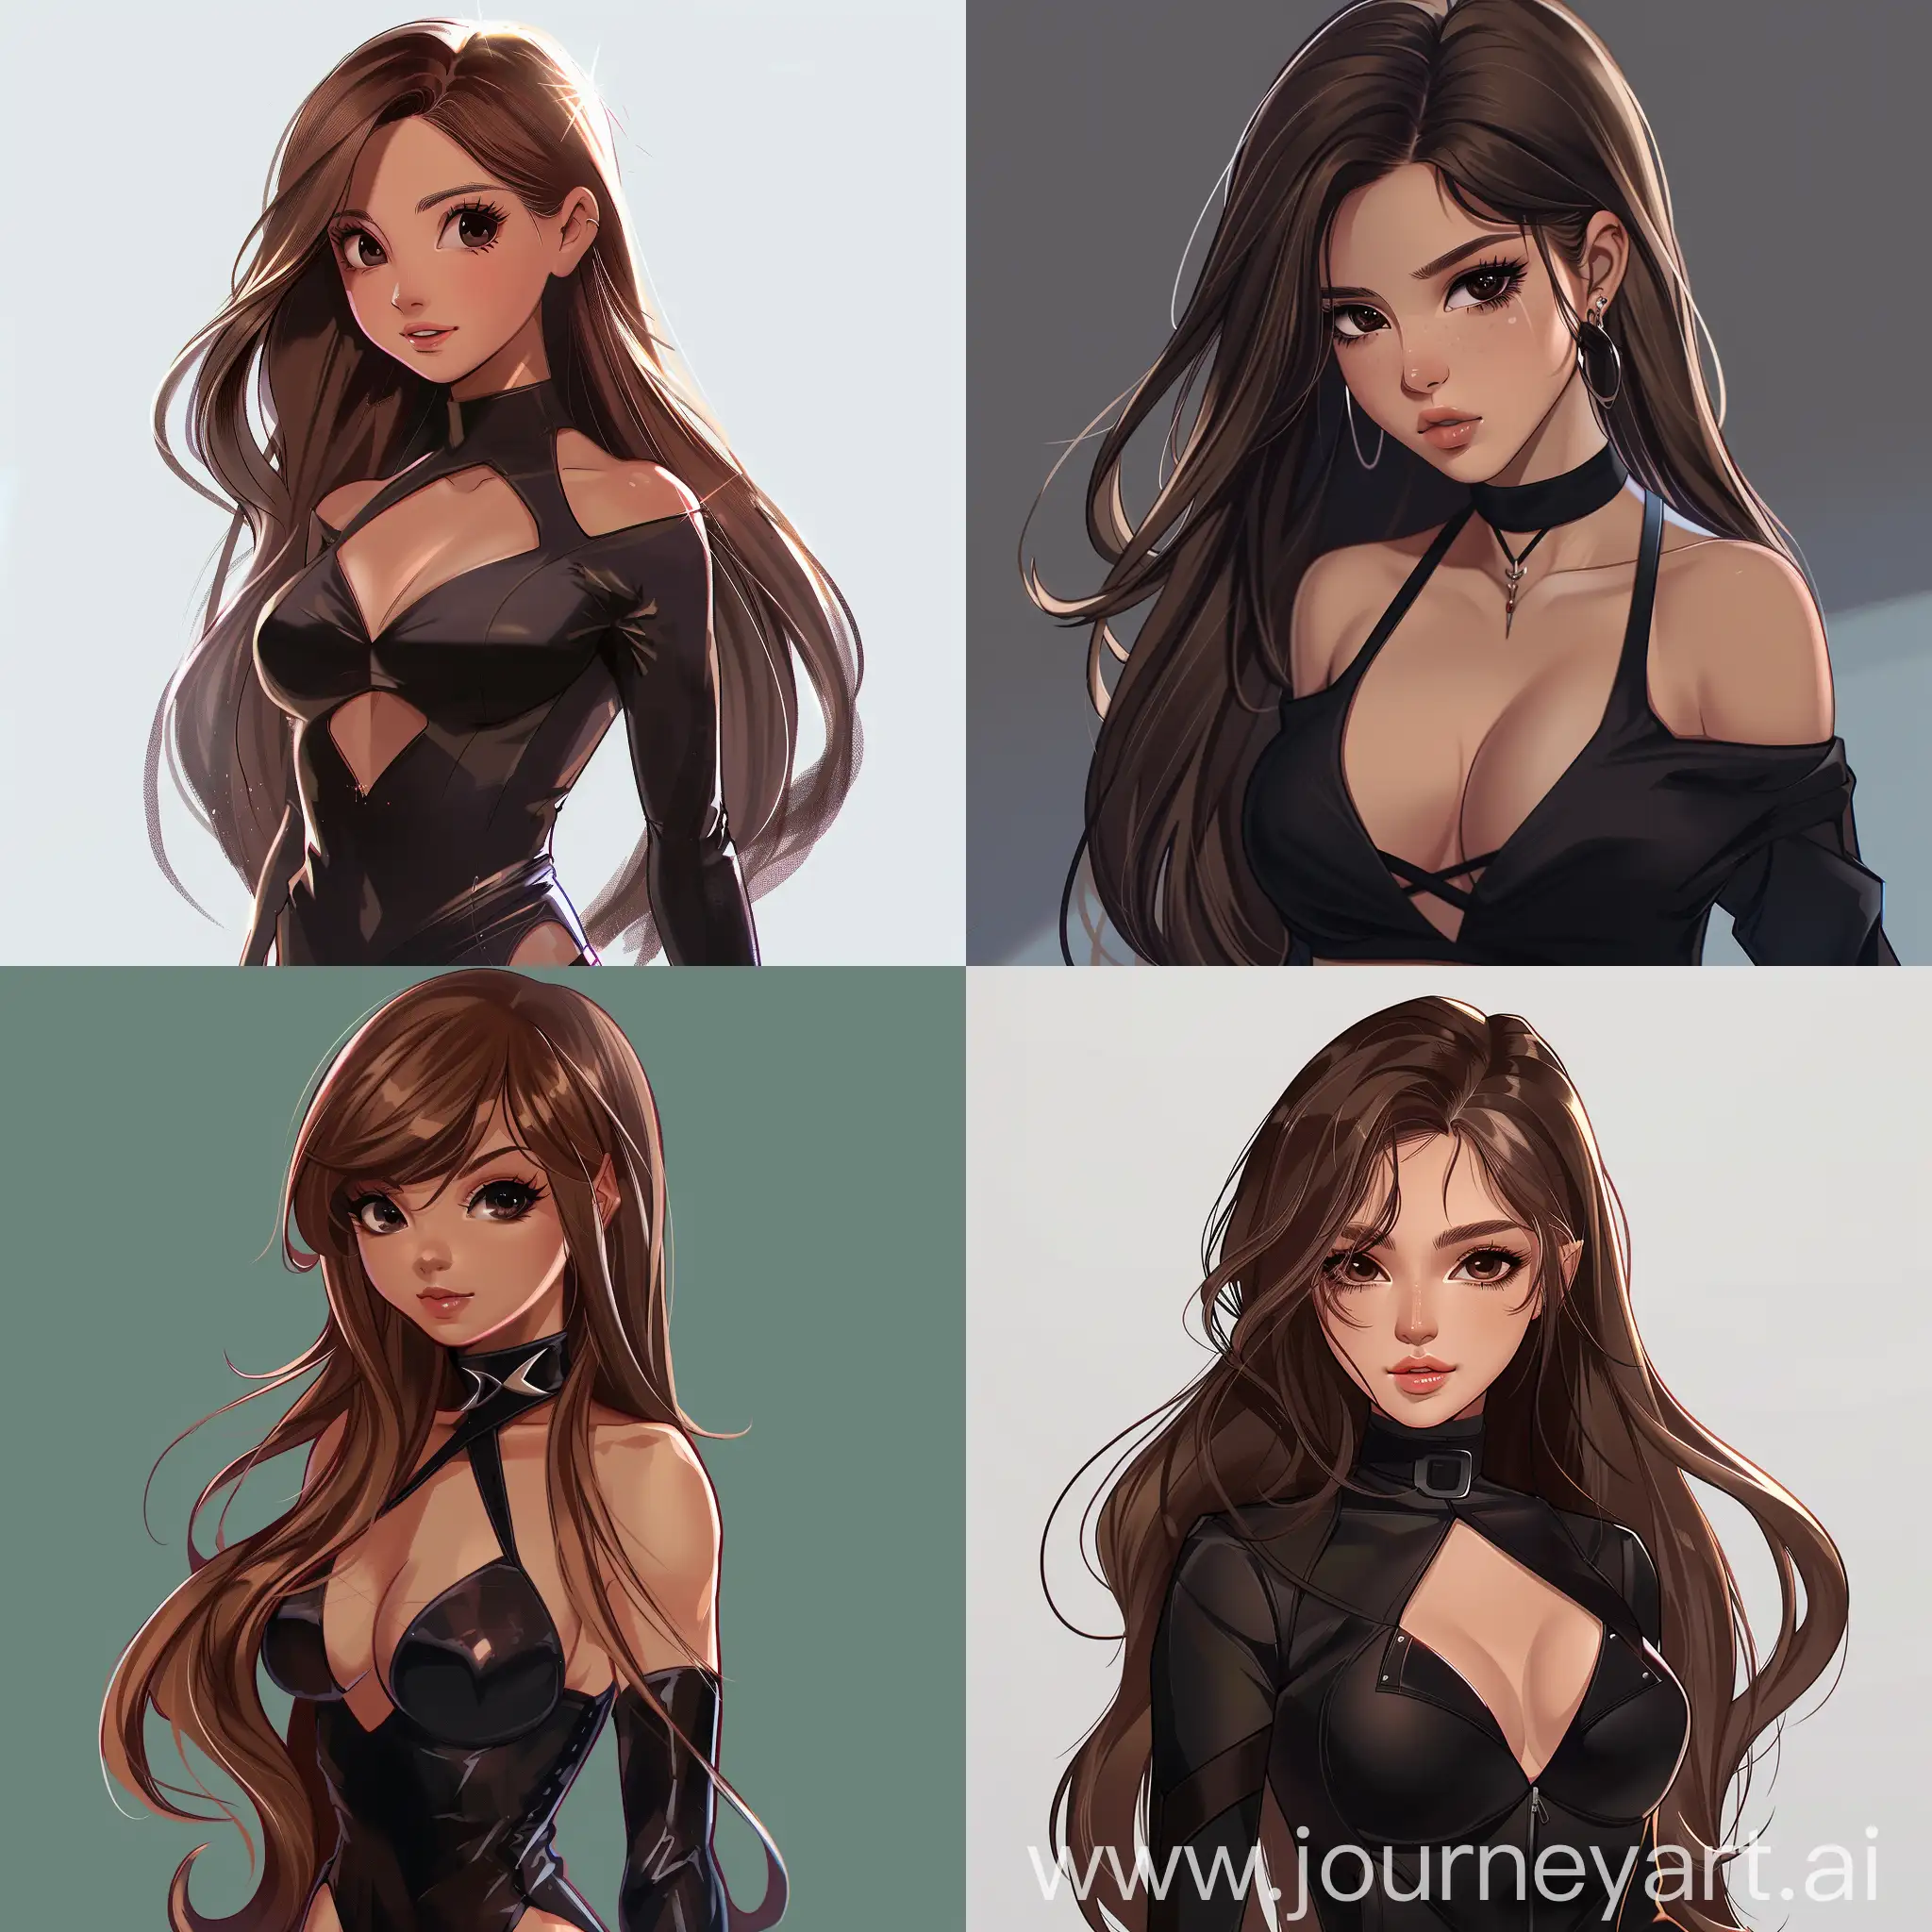 Sultry-Winx-Style-Digital-Art-Seductive-Brunette-in-Black-Outfit